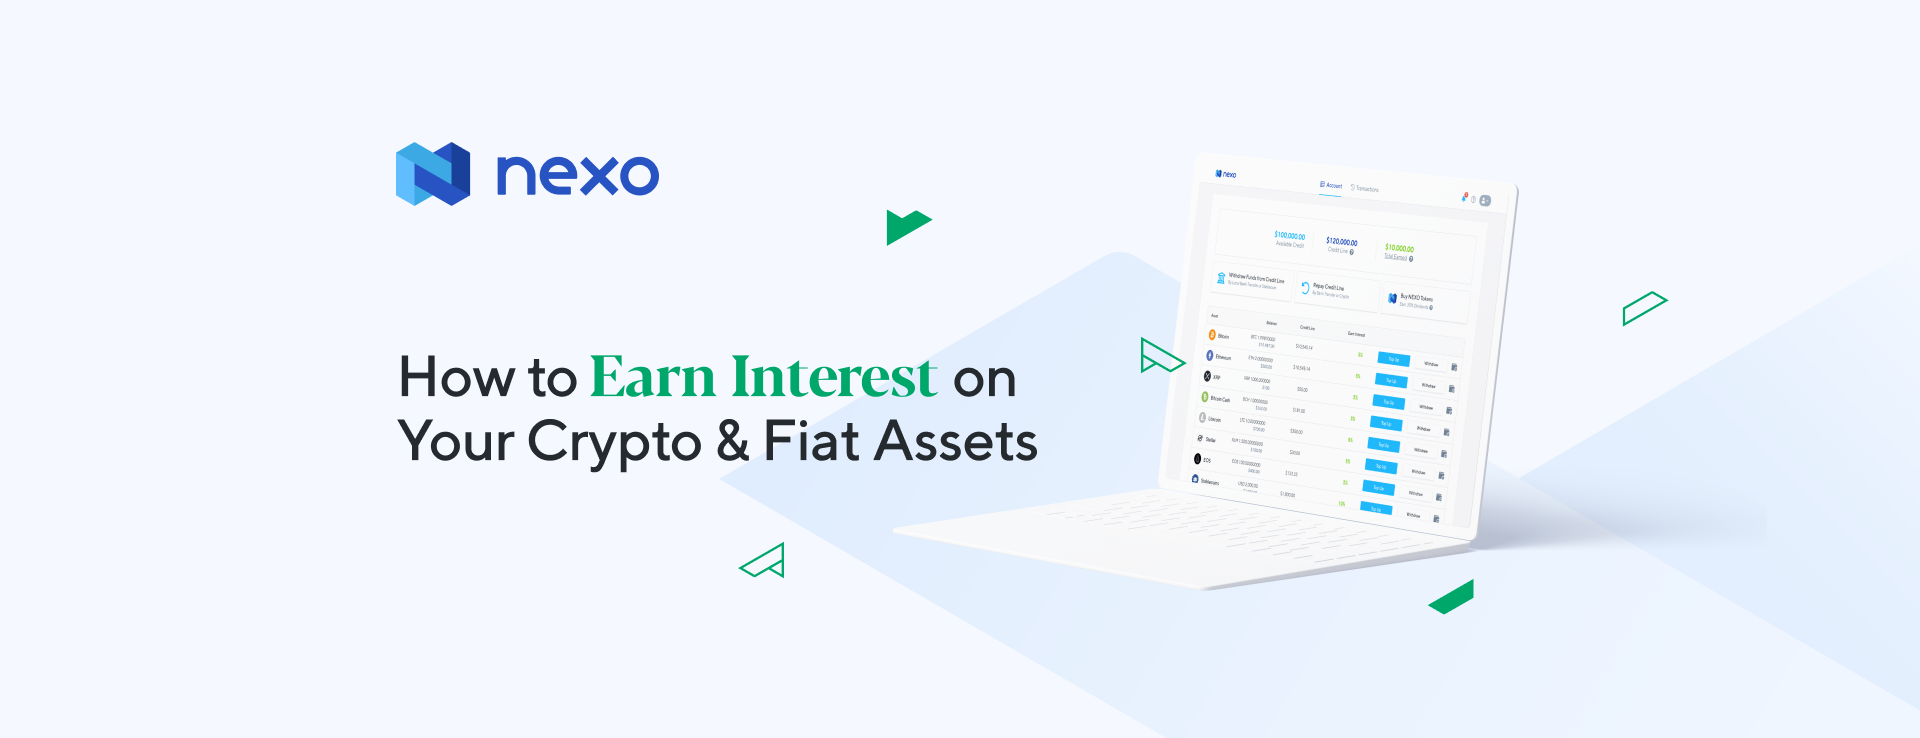 How to Earn Interest on Your Crypto Assets